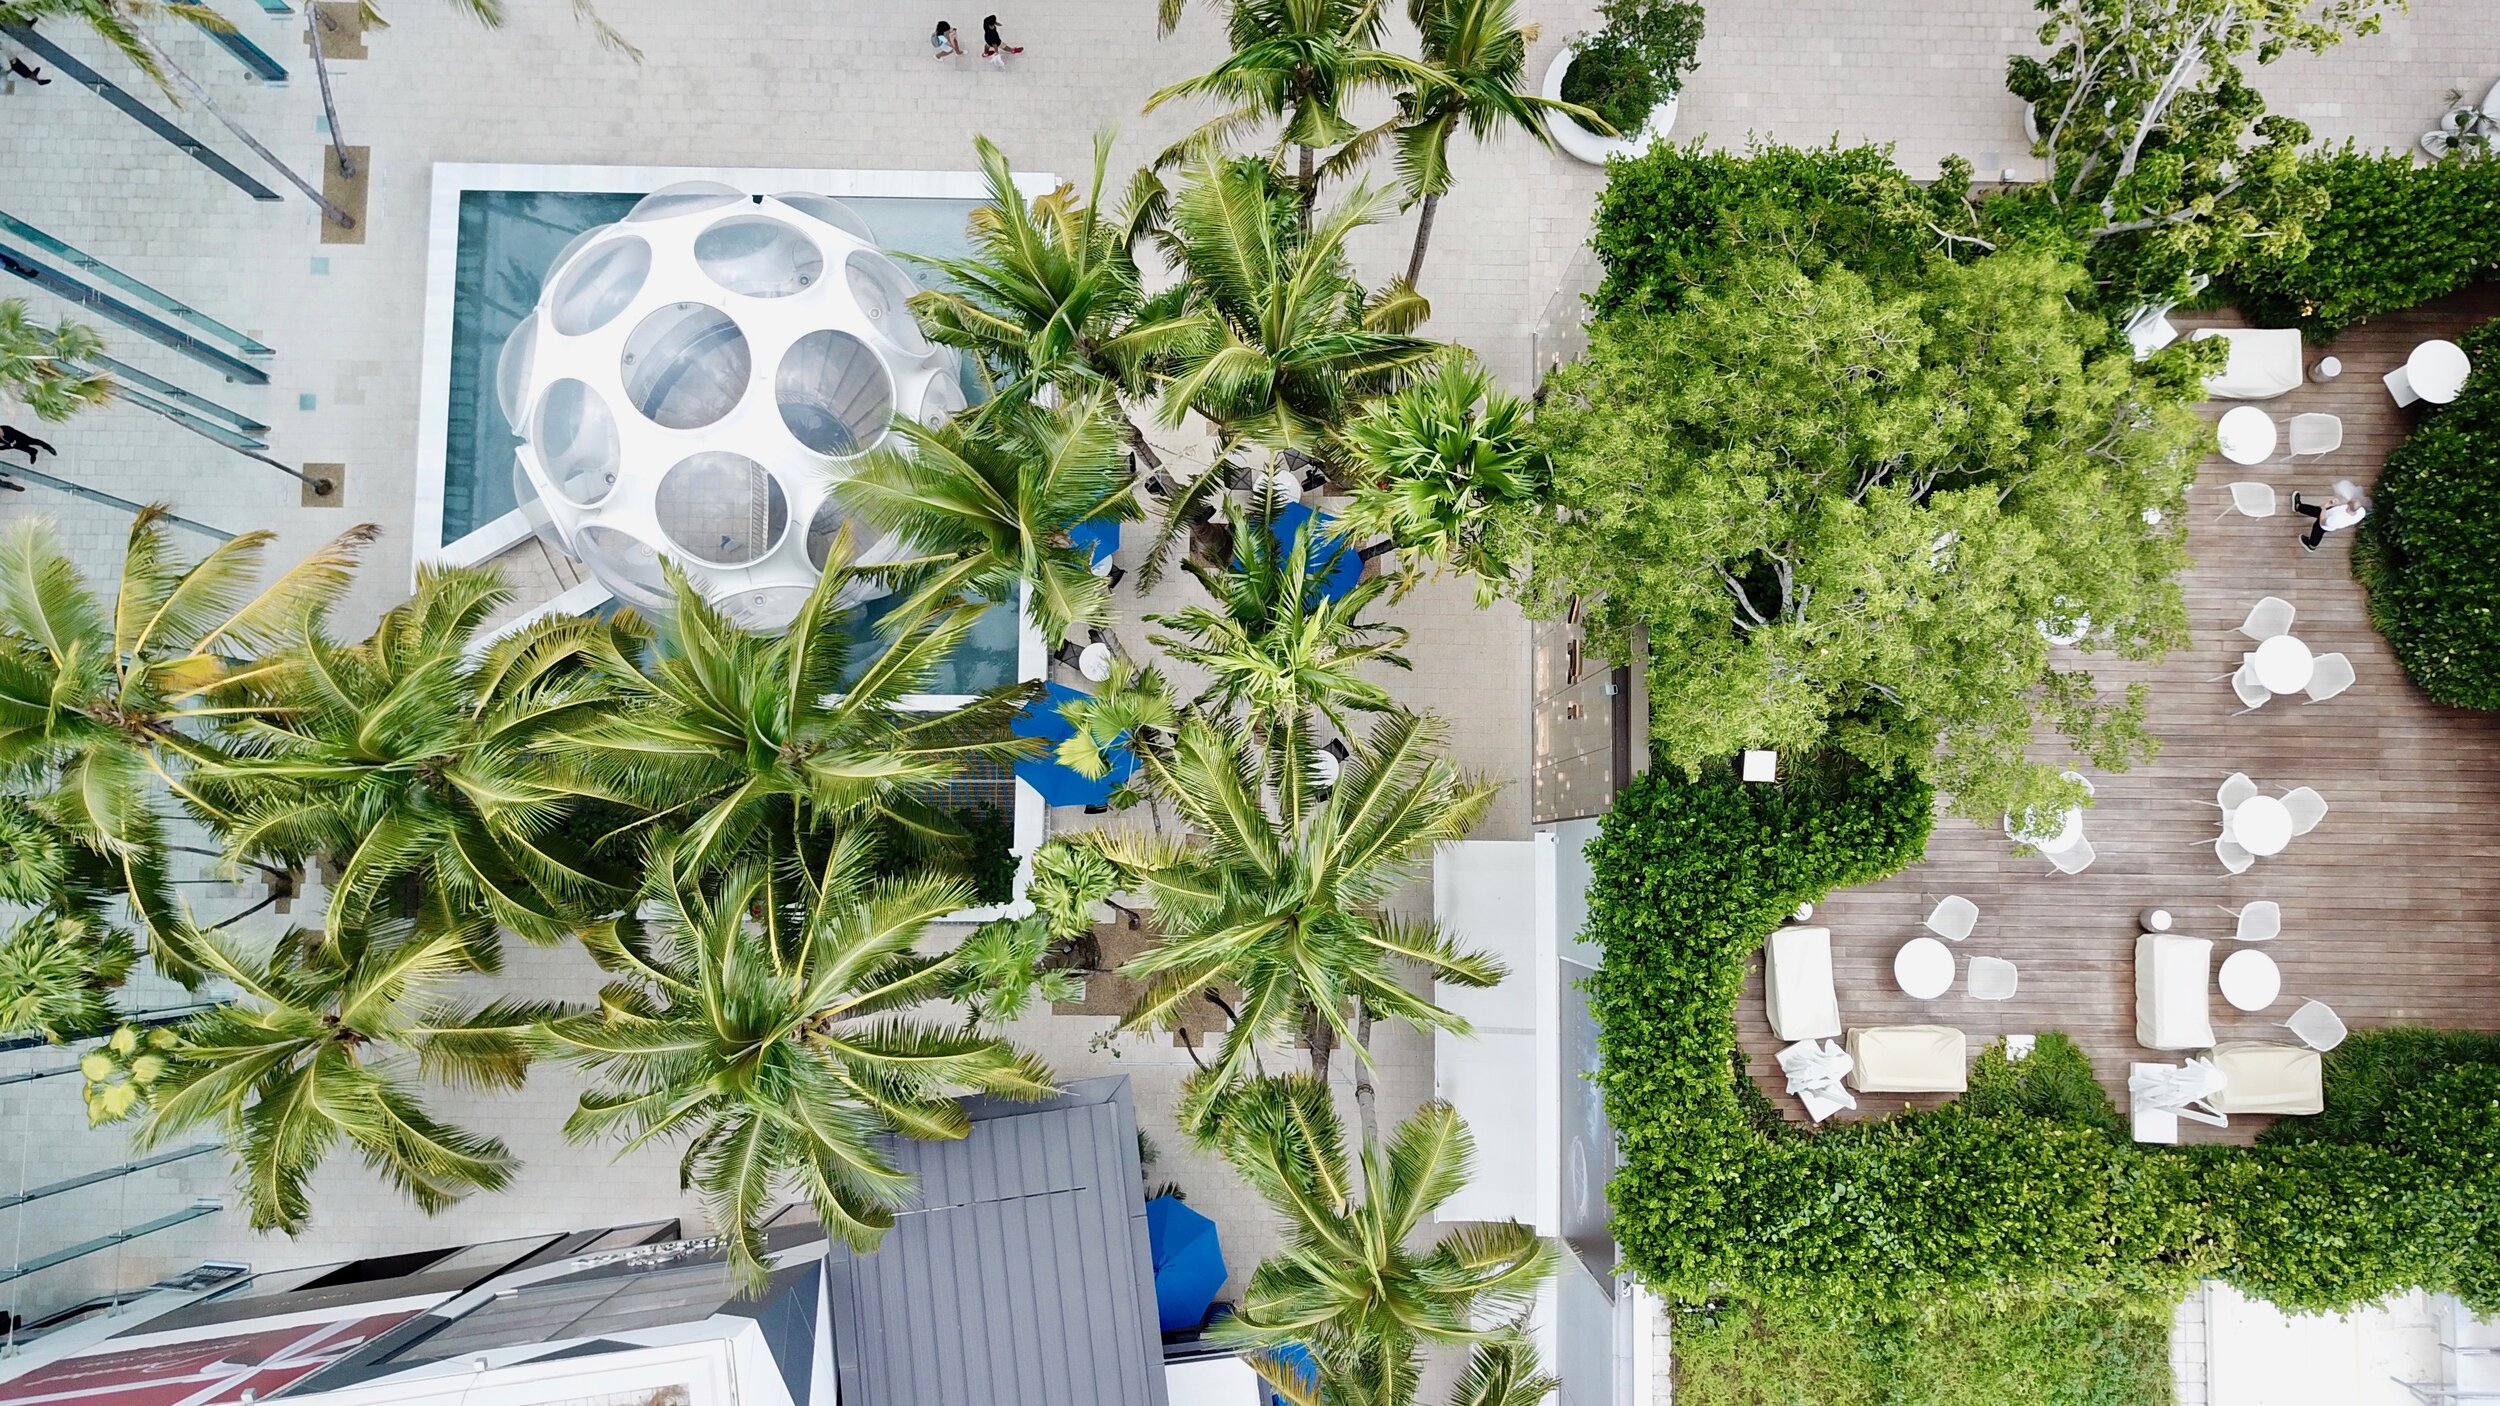 Miami's Design District Wants to Be the Coolest Neighborhood in America